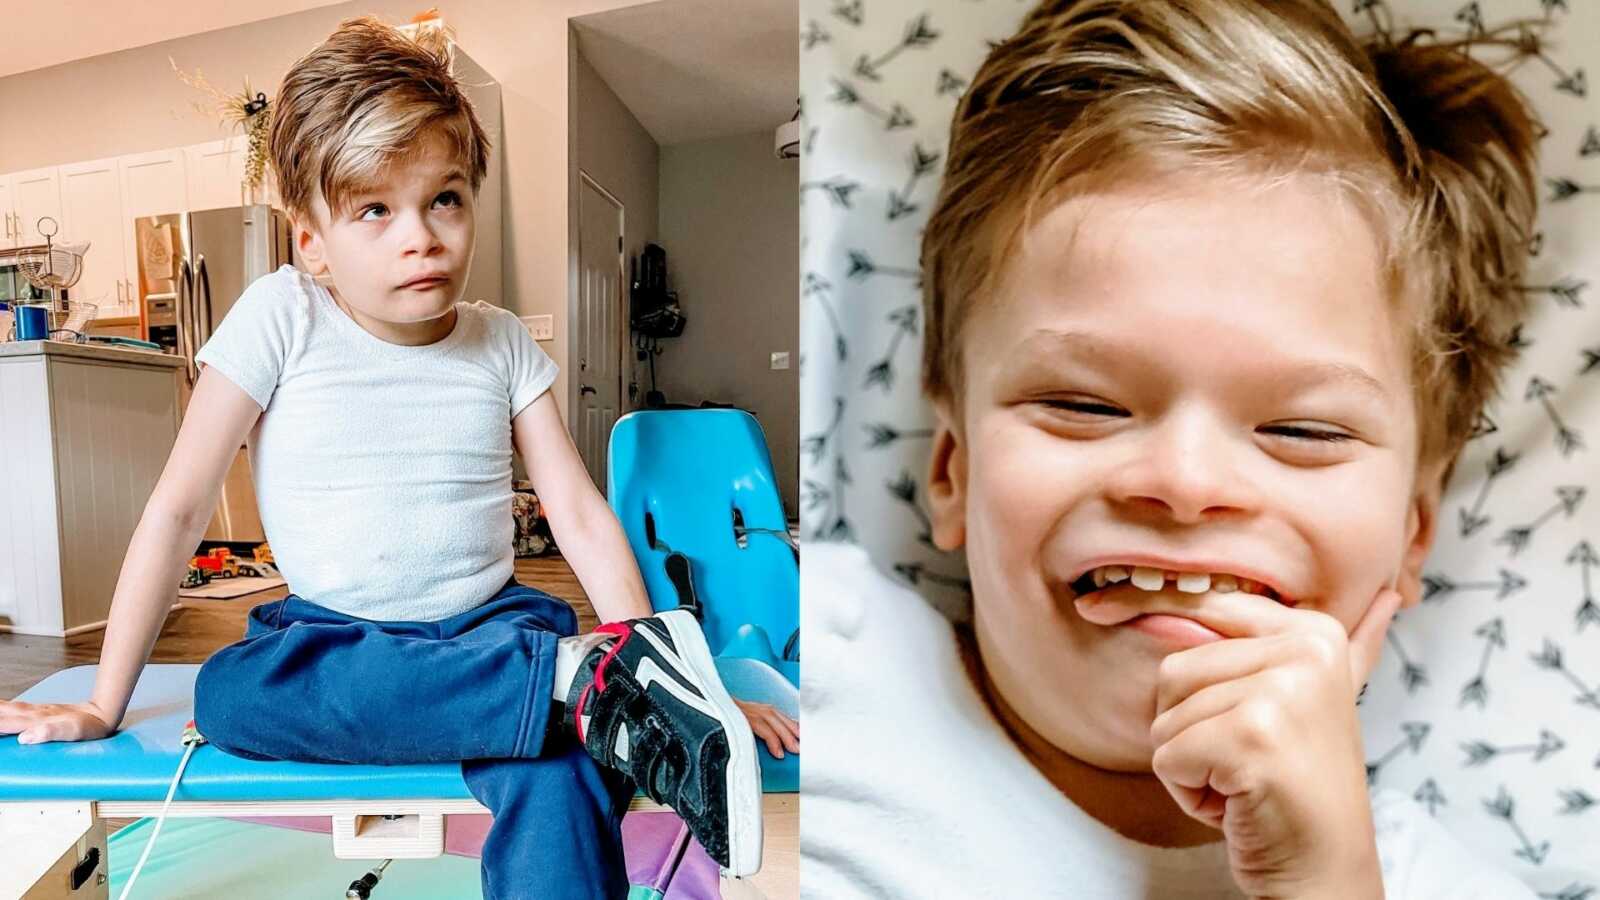 Special needs mom shares photos of her son with rare condition